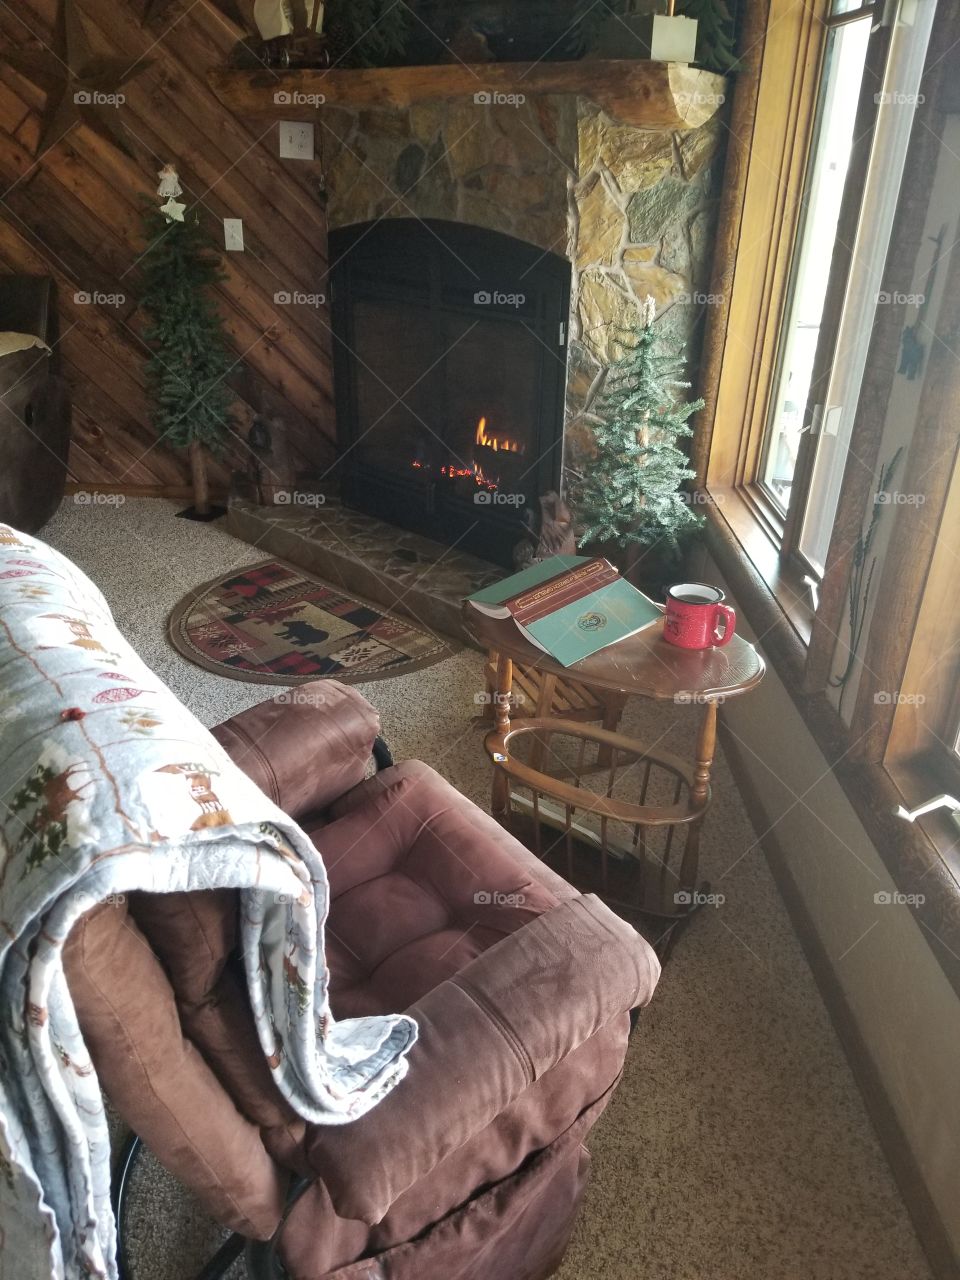 cozy fire, hand laid rock fireplace, recliner,  a homemade quilt,  a classic book and a hot beverage. perfect spot to enjoy reading, nature watching out the window, snow falling or a leisurely conversation with loved ones